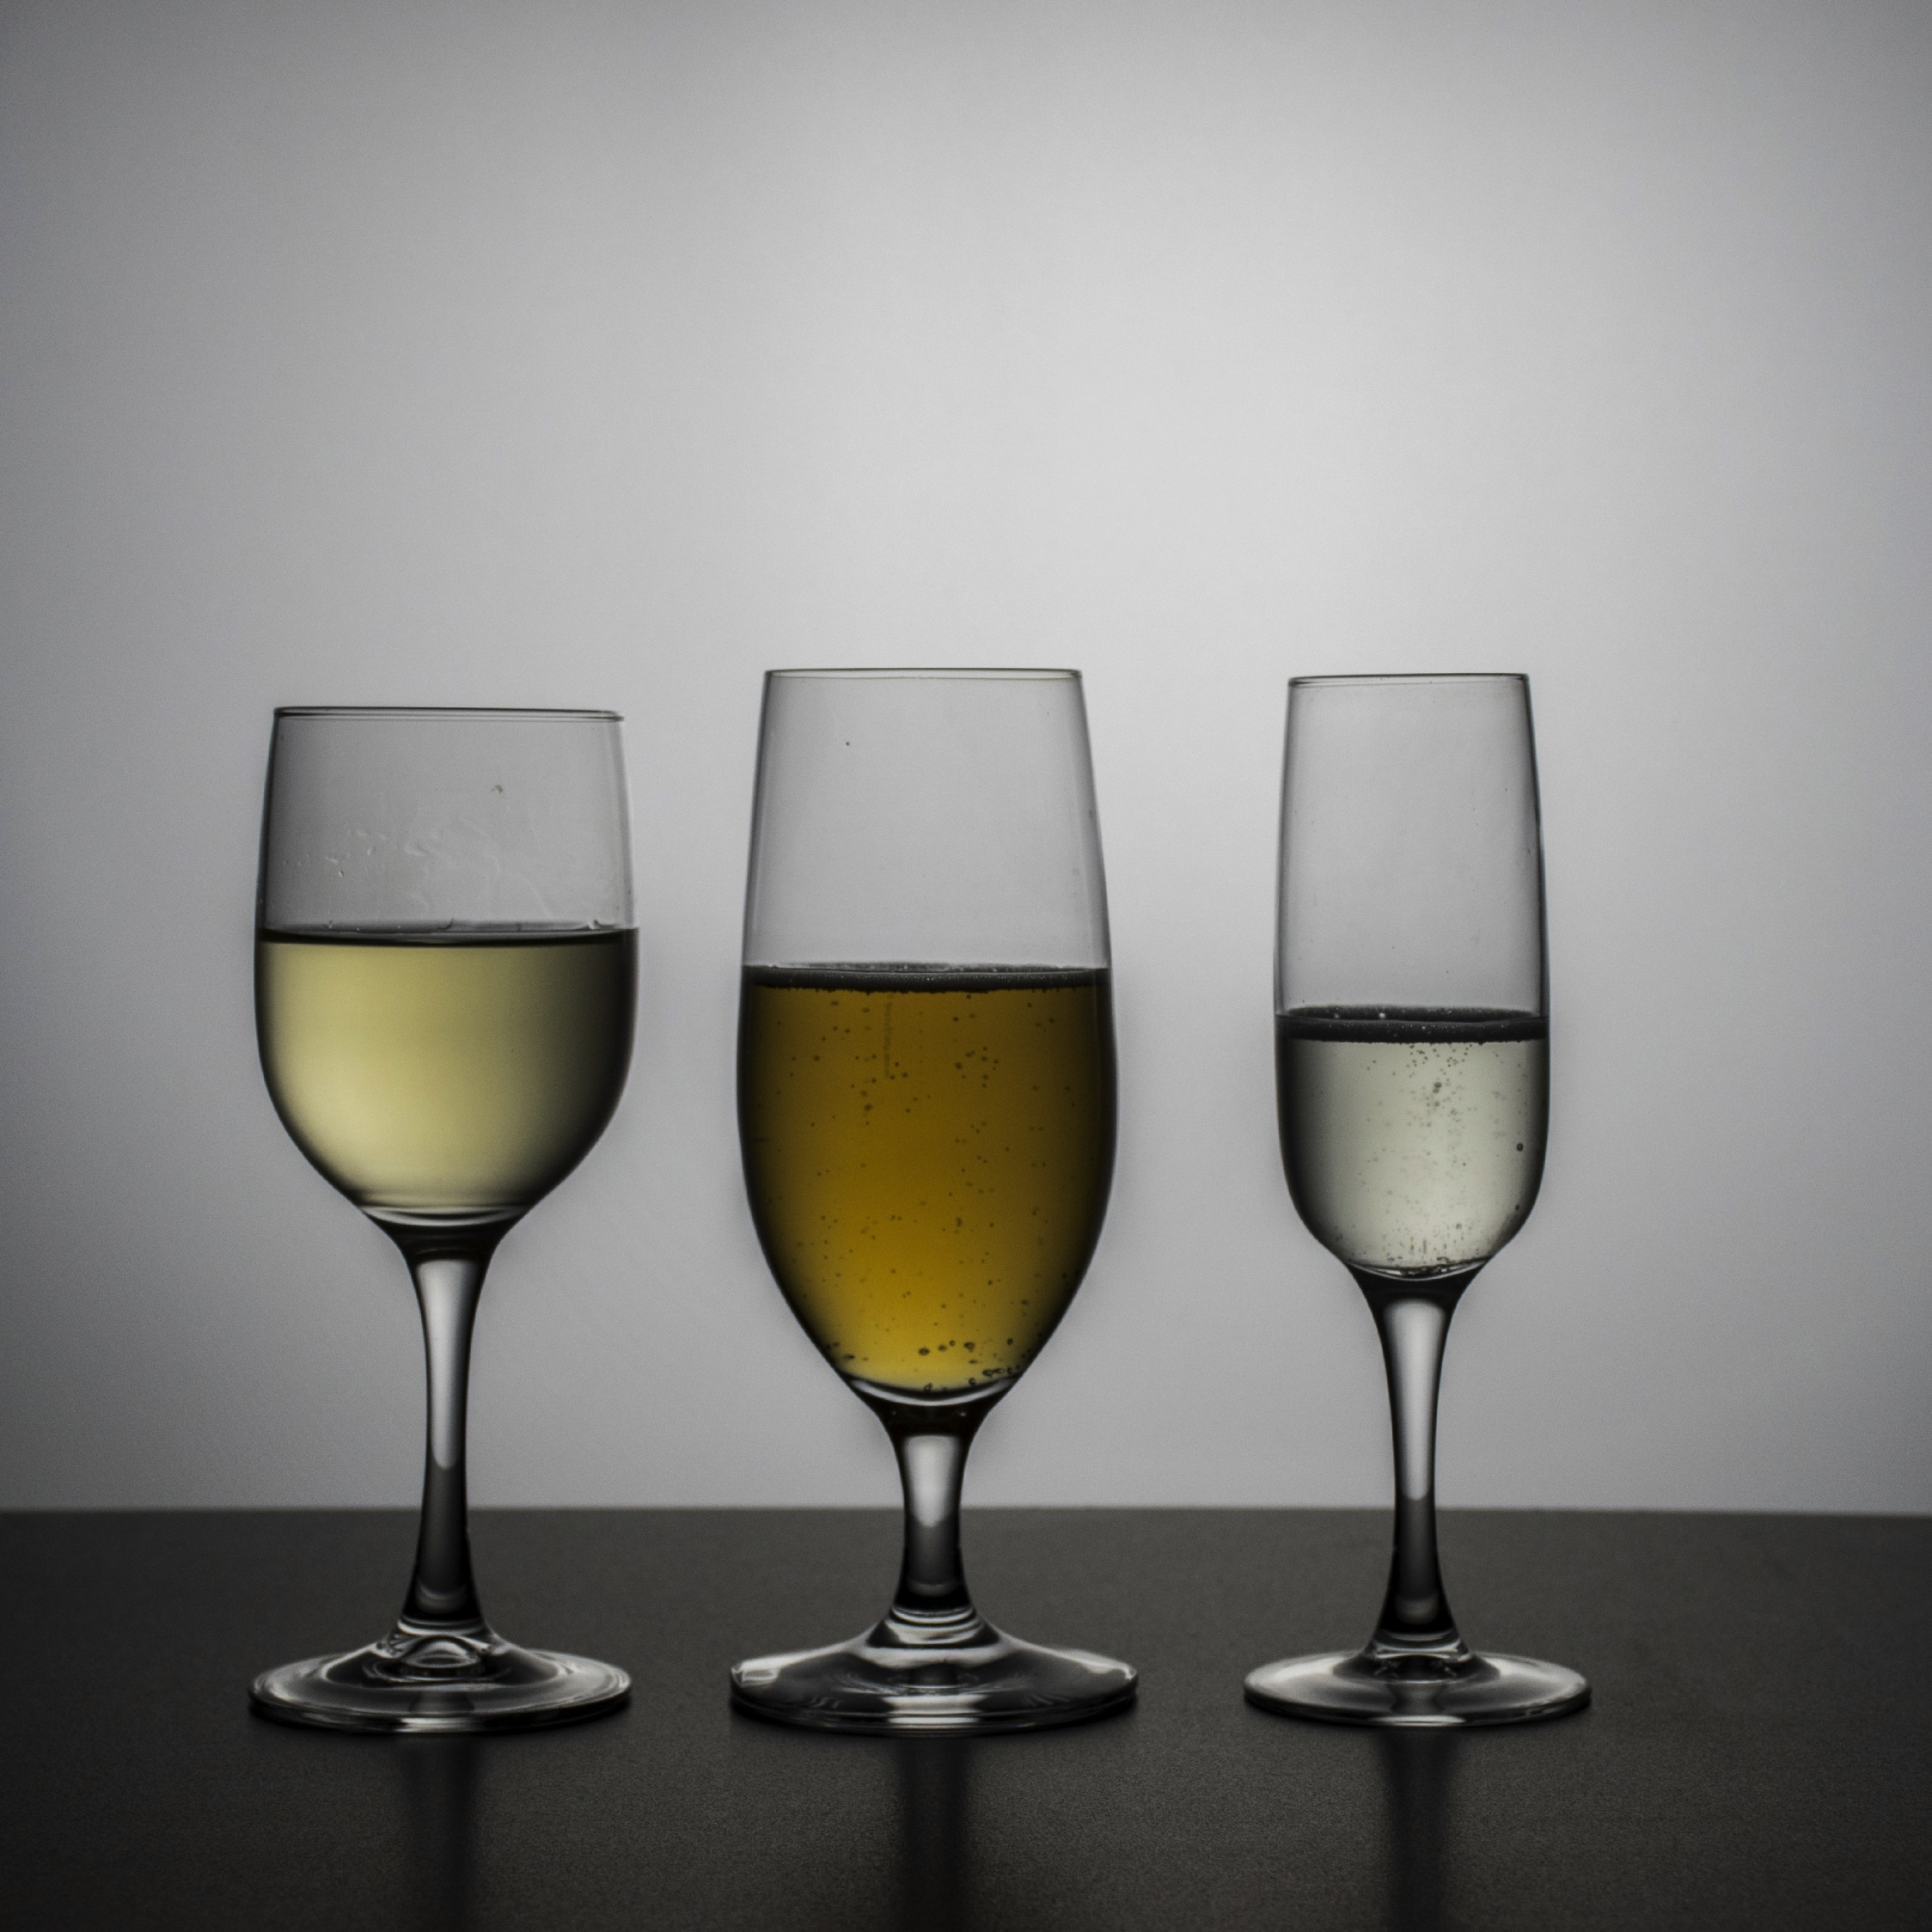 3 Wine Glasses, Drinks, Alcohol, Wallpaper - Alcoholic Drink - HD Wallpaper 